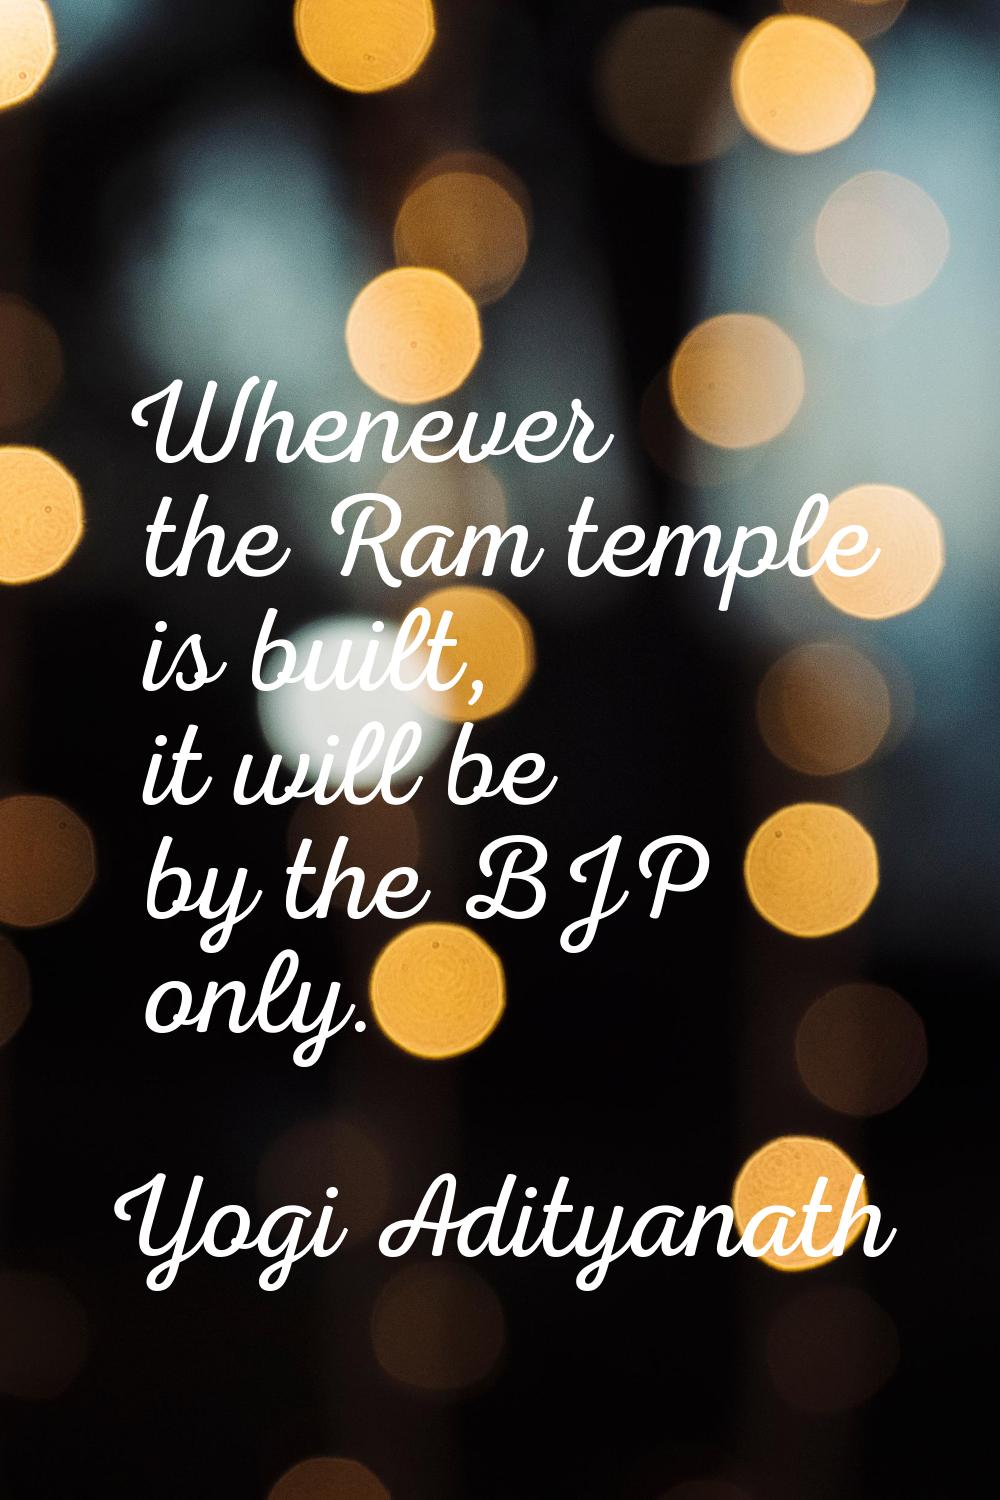 Whenever the Ram temple is built, it will be by the BJP only.